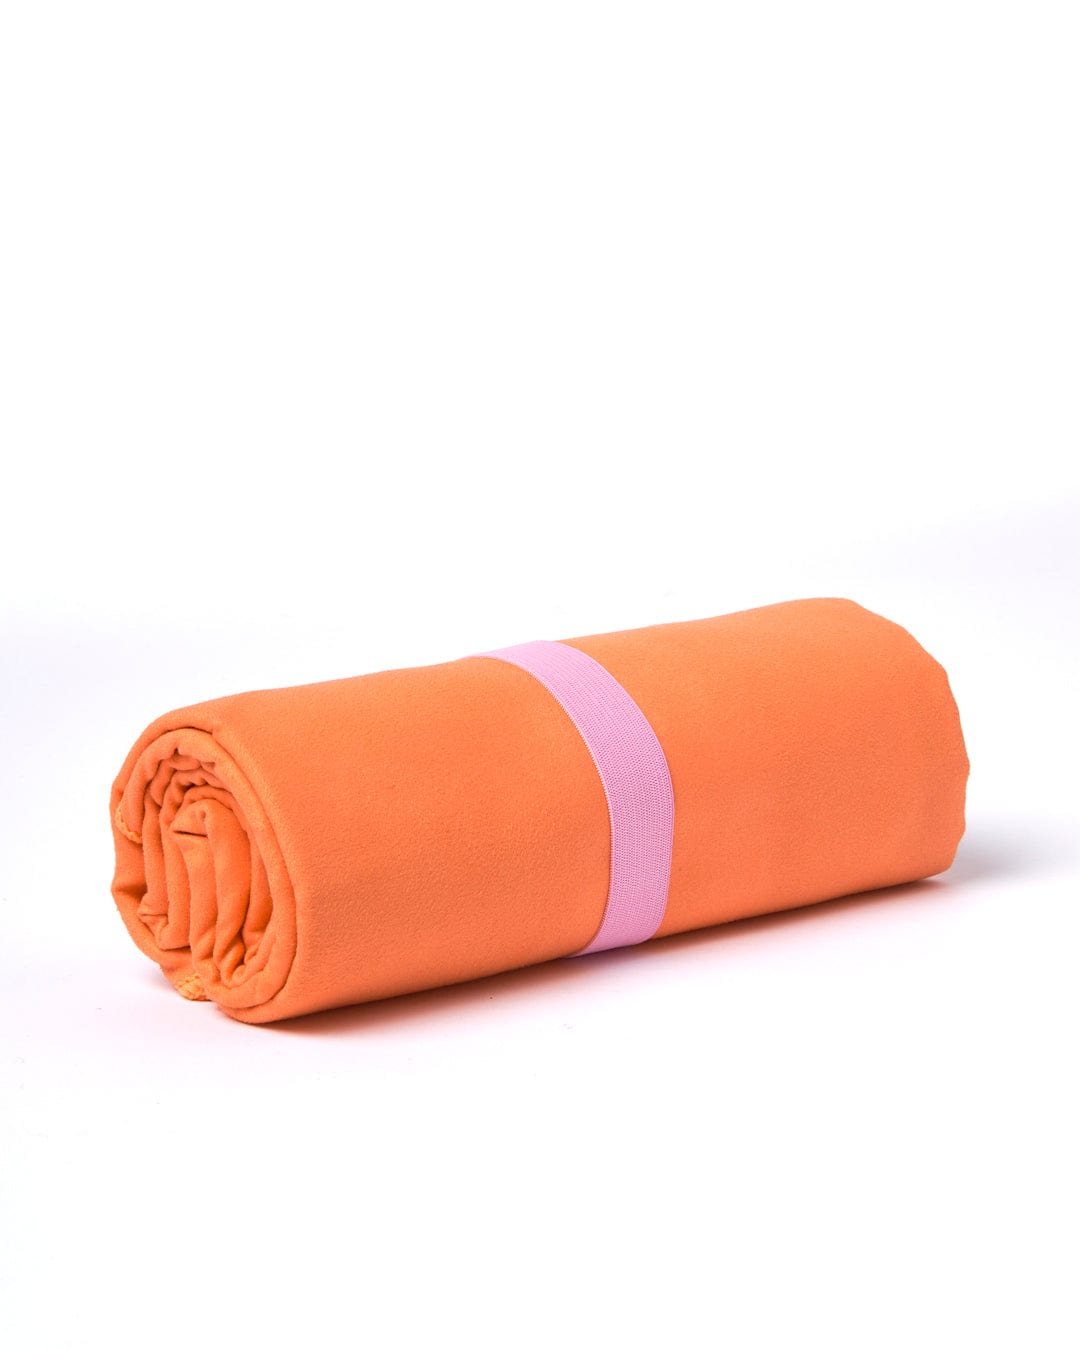 An orange, absorbent Cold Water Club microfibre towel neatly rolled up and secured with a pink elastic band on a white background.